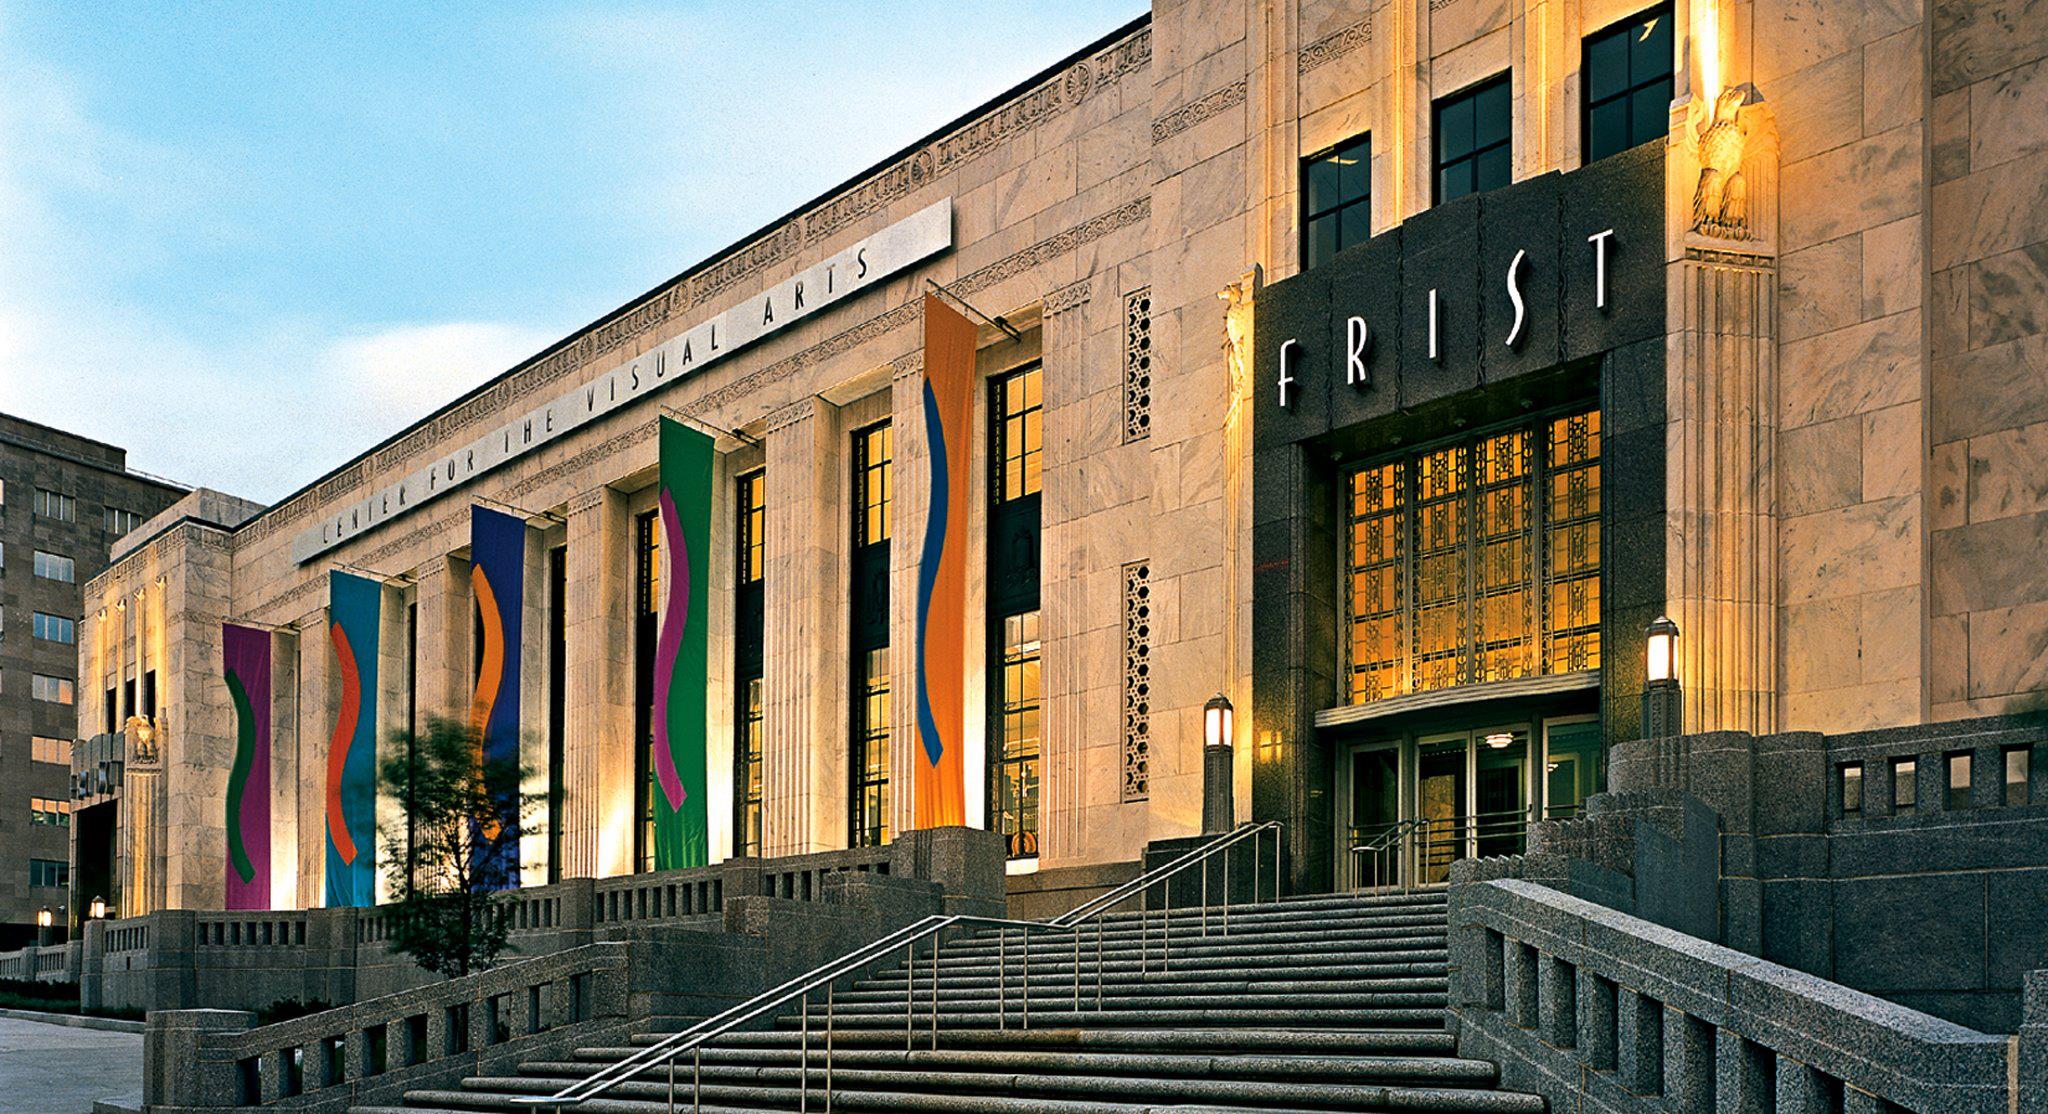 The Frist art museum building with colorful flags and warm lighting